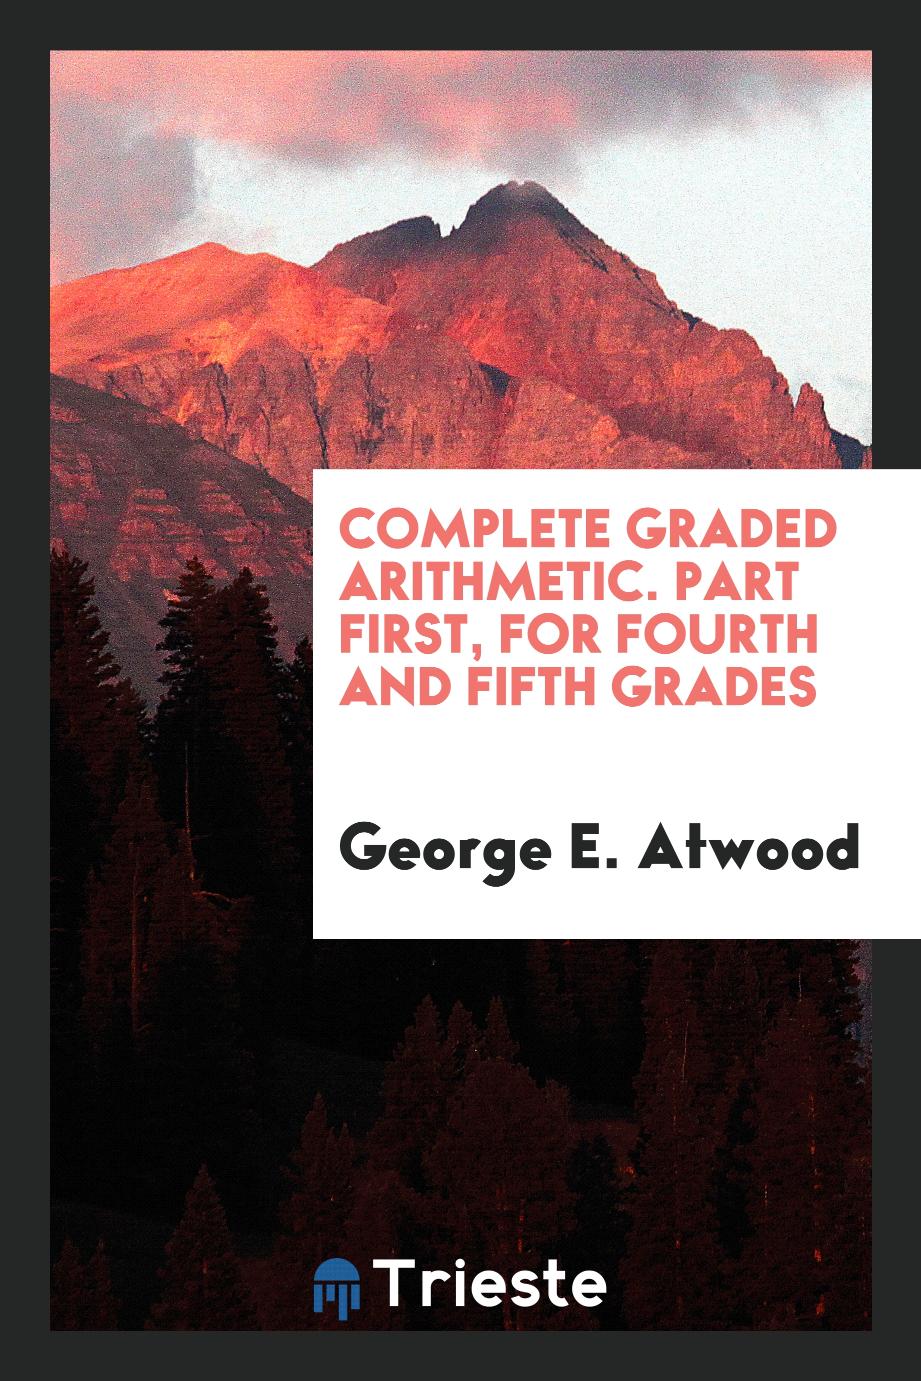 Complete Graded Arithmetic. Part First, for Fourth and Fifth Grades